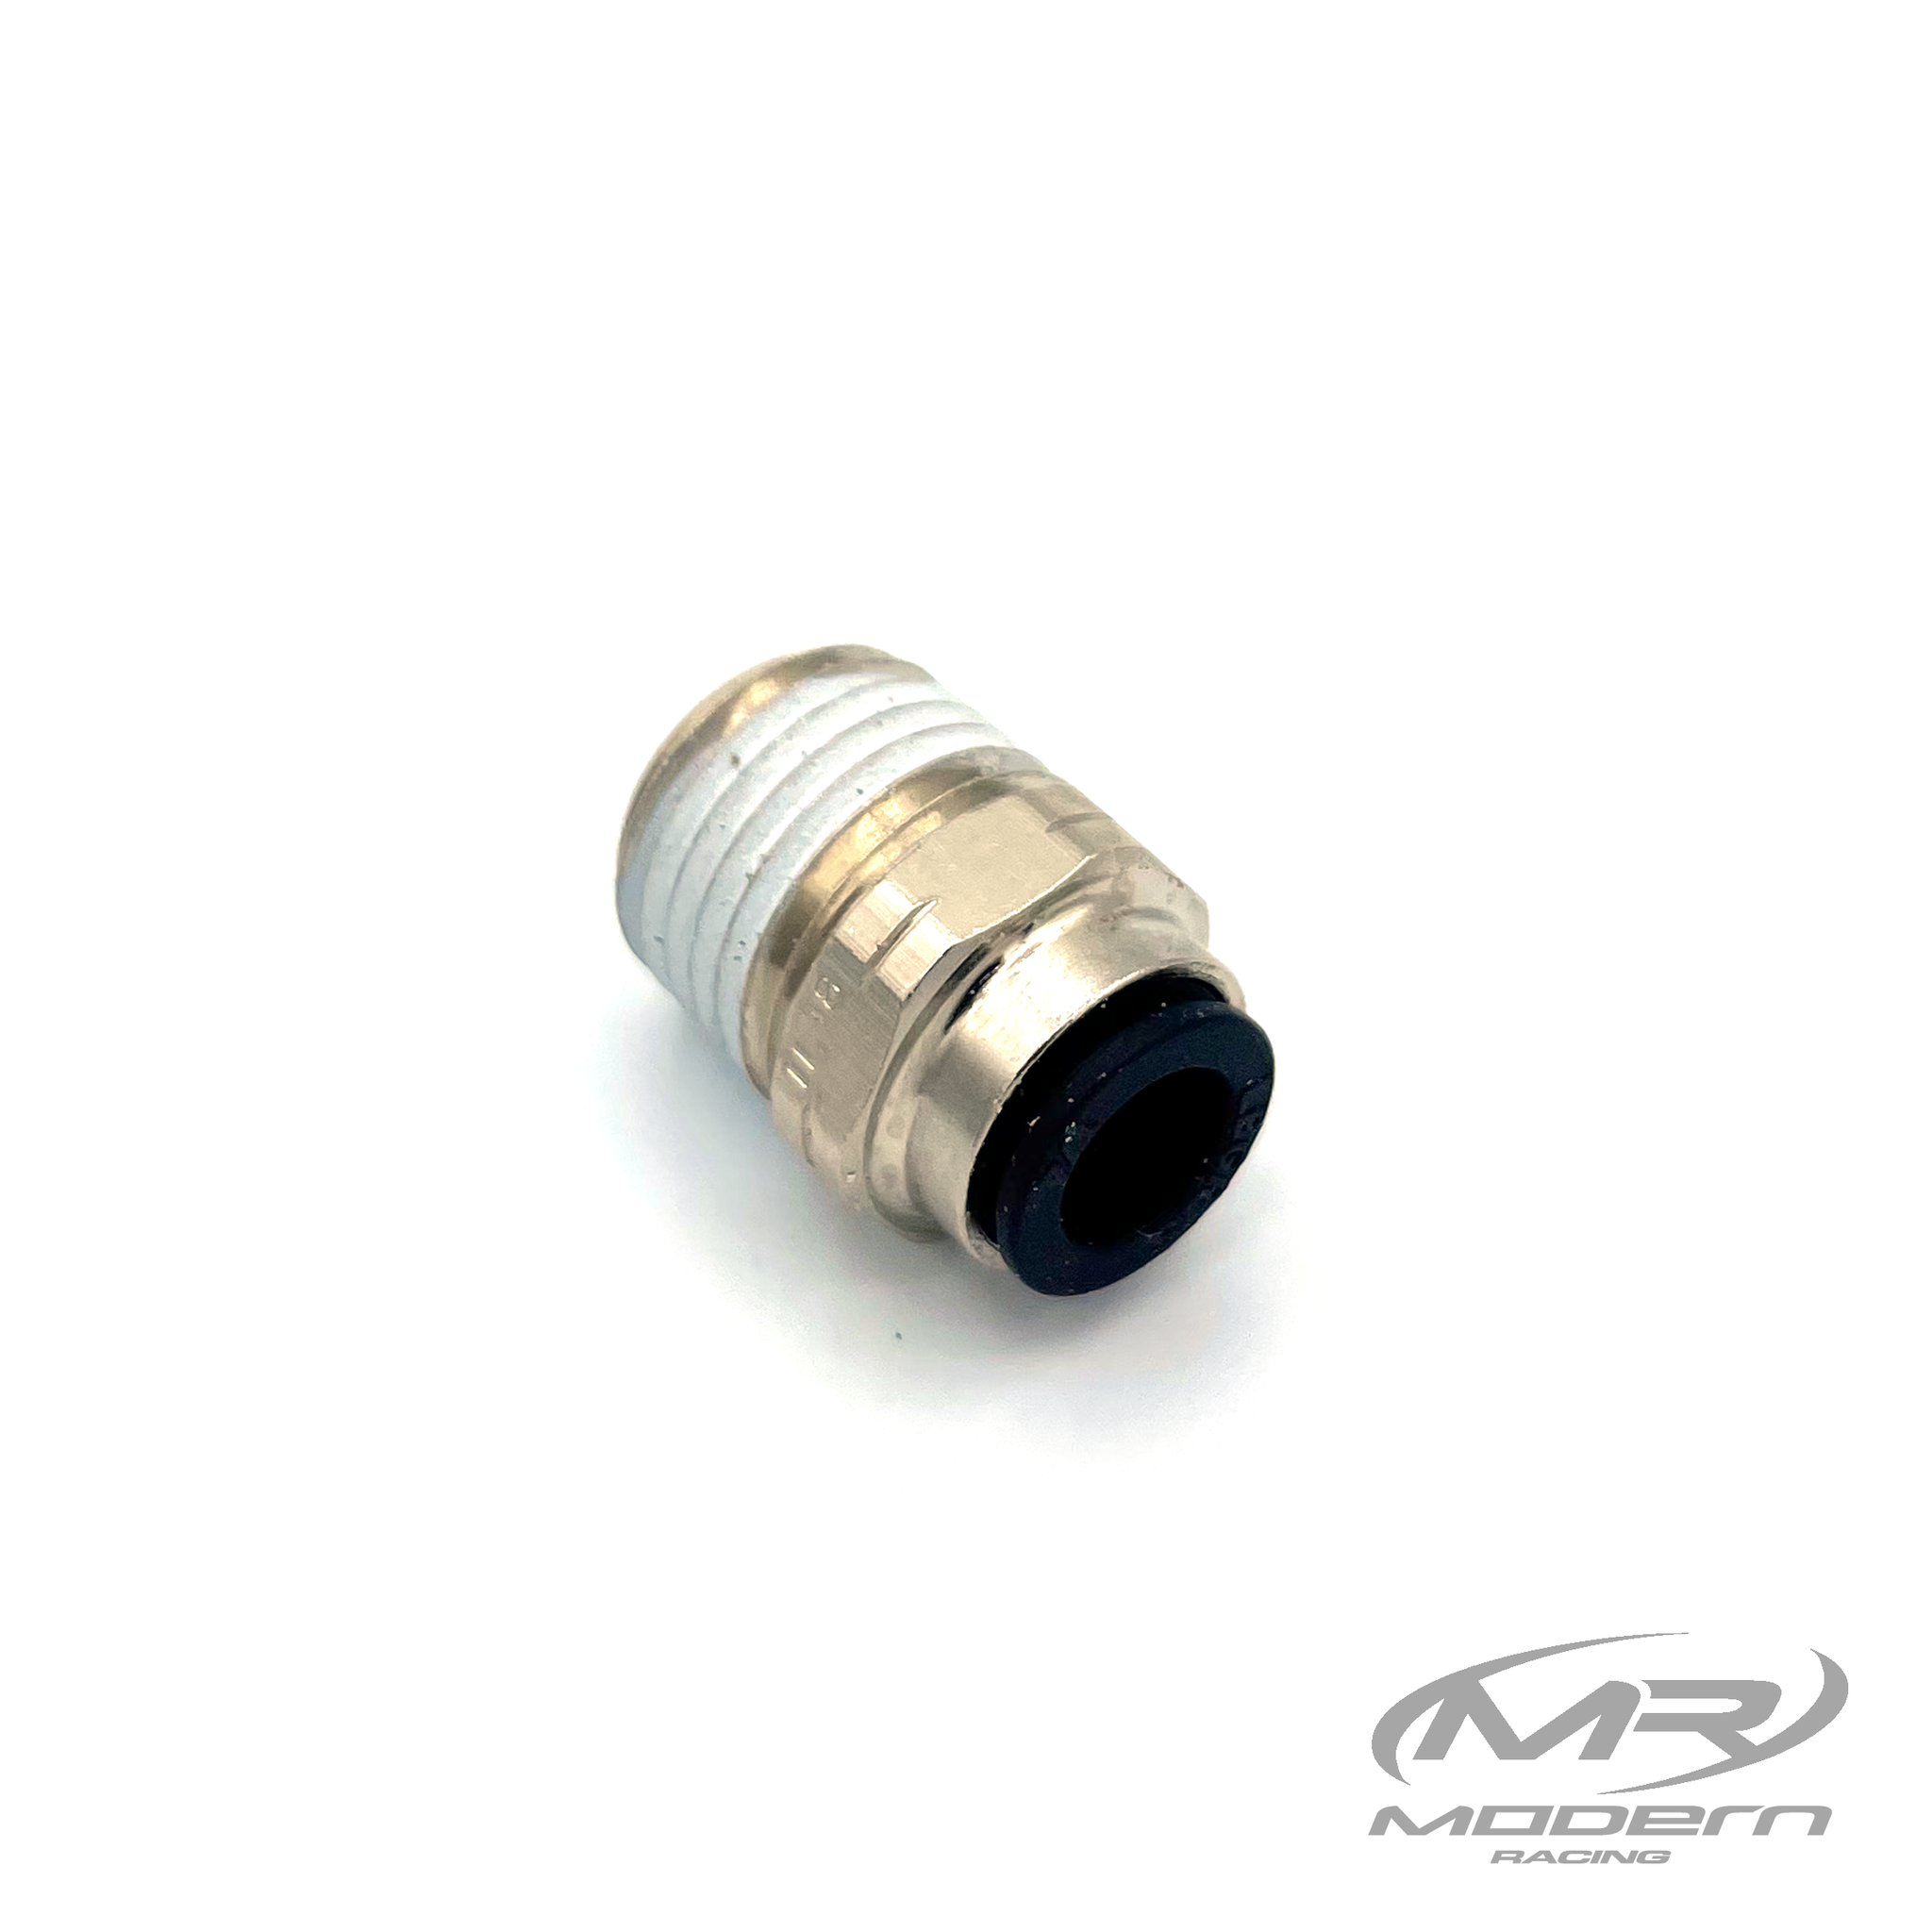 1/4" Push-Loc Female To 1/4" NPT Male Straight Air Fitting Brass (Nickel Plated)